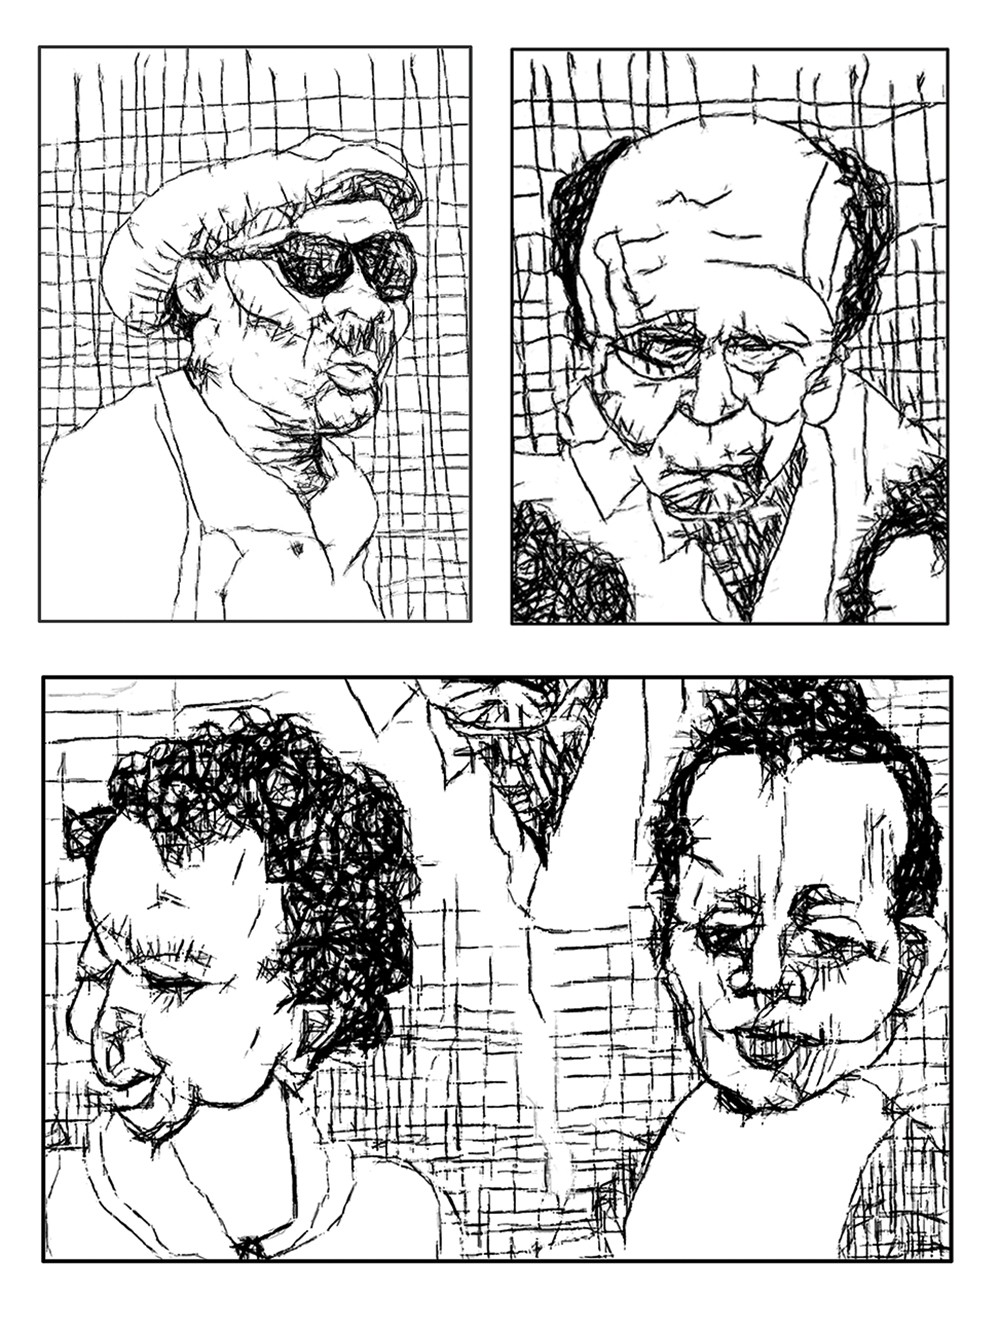 B&W three panel drawing of two men and two girls.